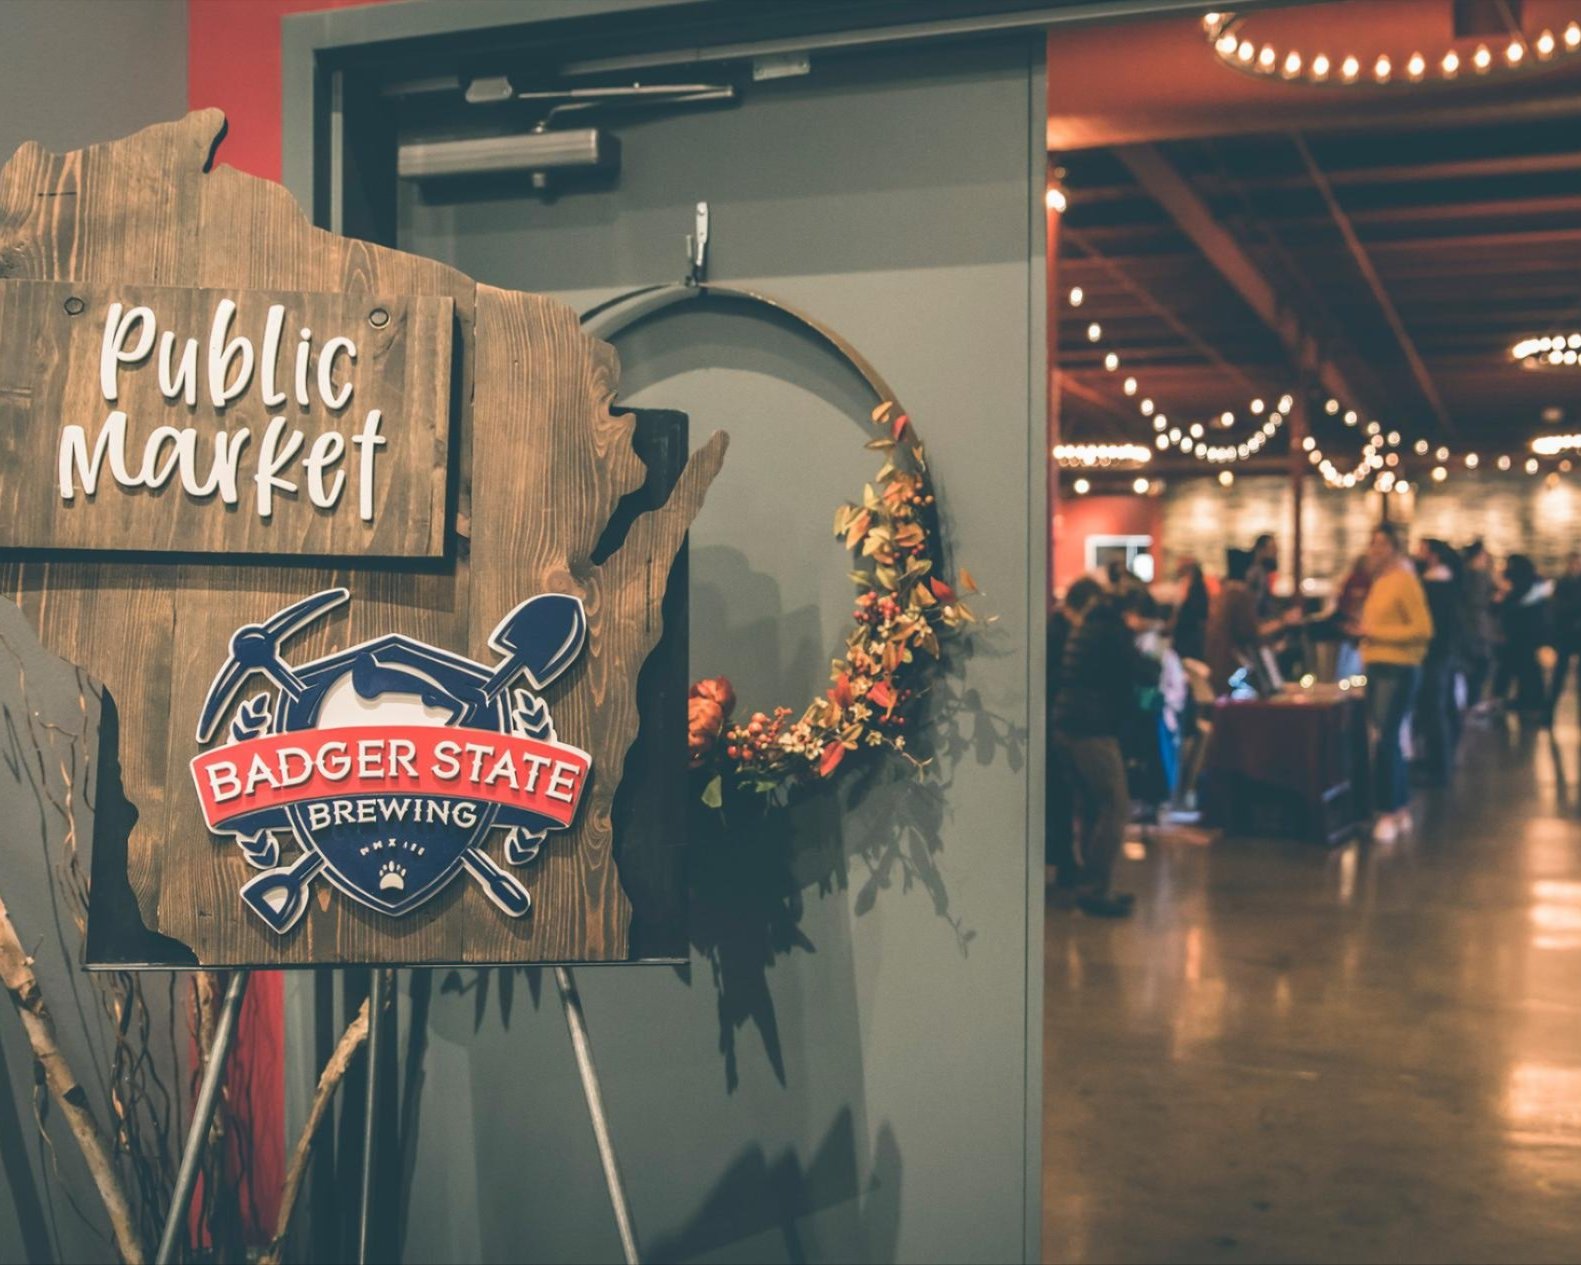 Badger State Brewing Company Indoor Public Market